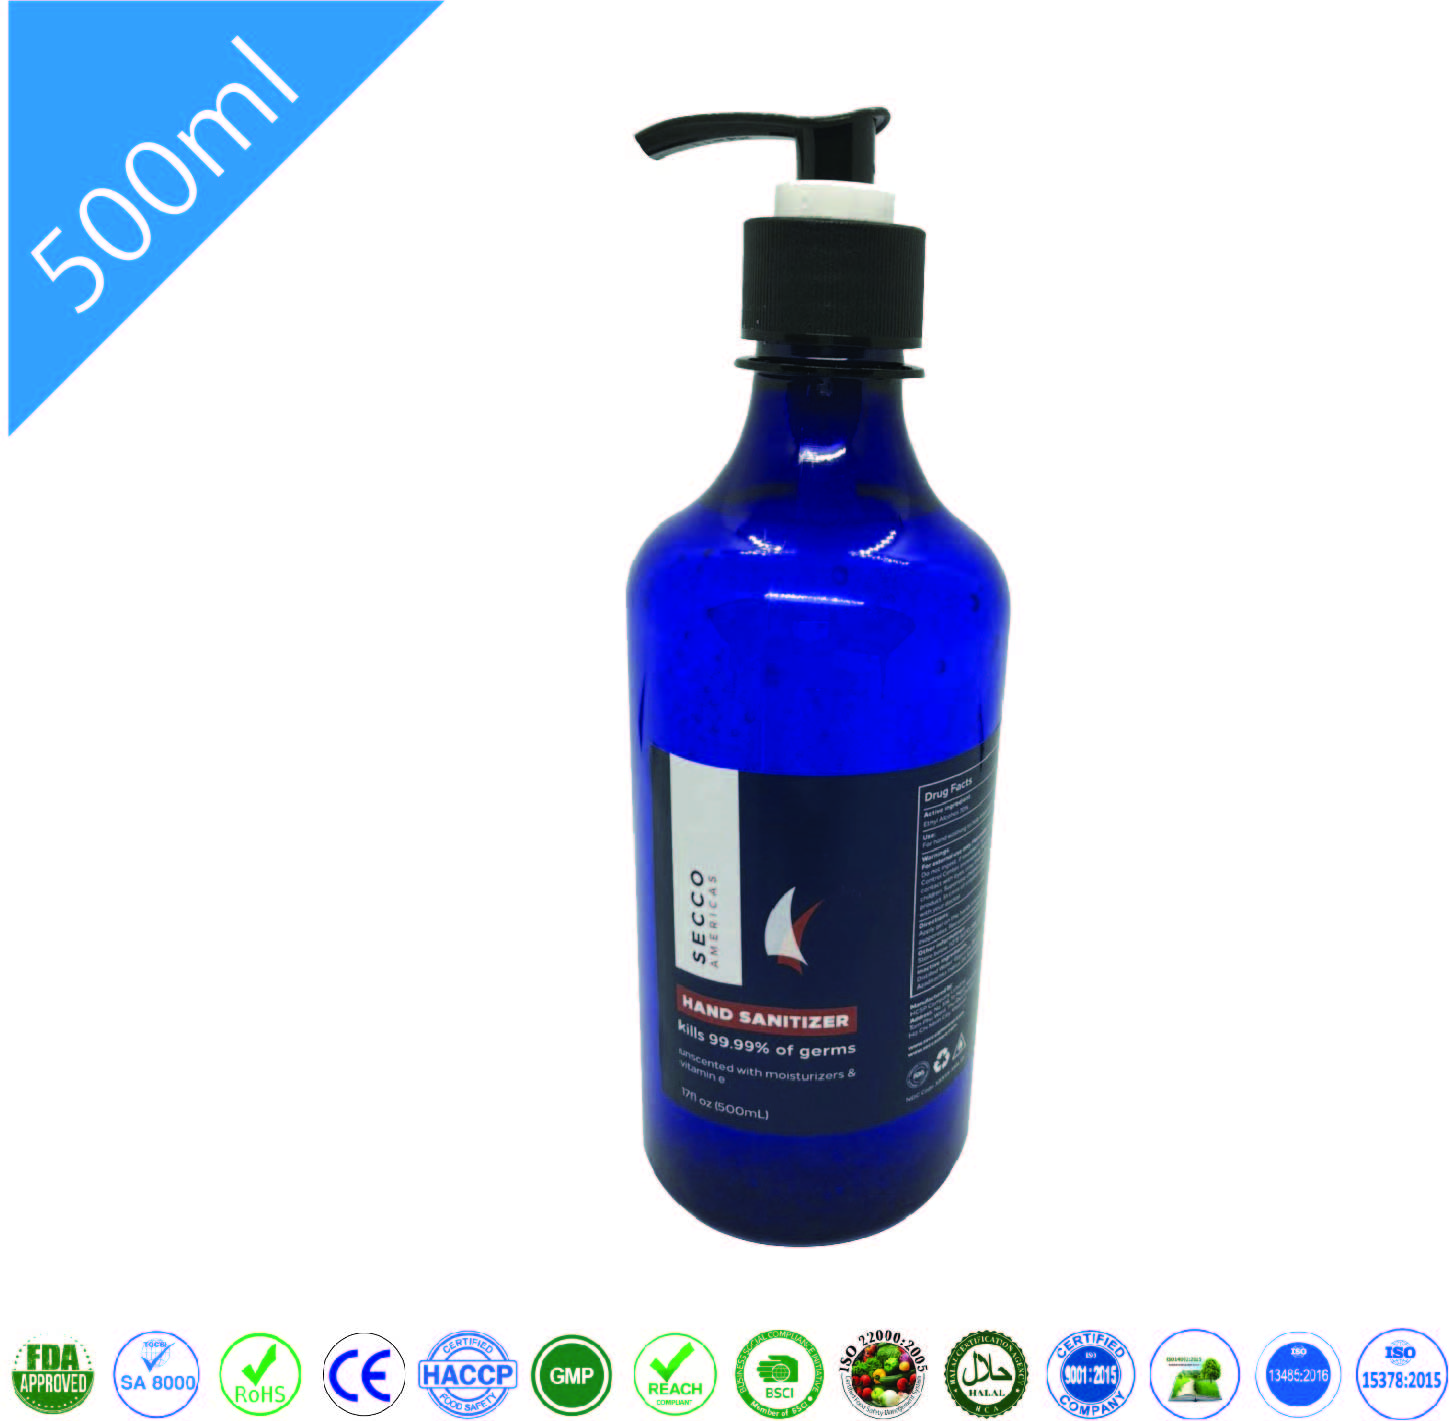 Secco hand sanitizer 500ml with pump